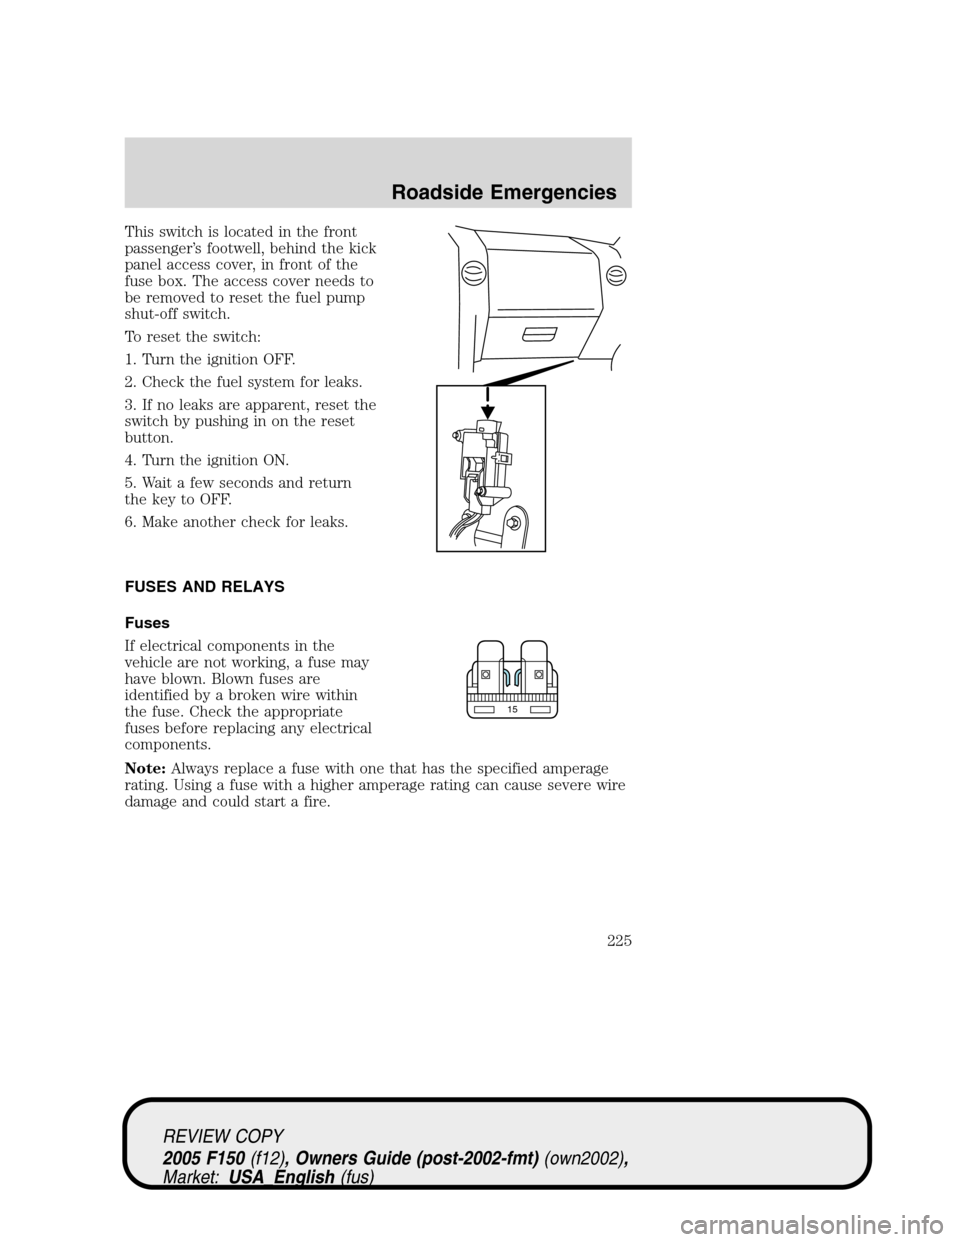 FORD F150 2005 11.G Owners Manual This switch is located in the front
passenger’s footwell, behind the kick
panel access cover, in front of the
fuse box. The access cover needs to
be removed to reset the fuel pump
shut-off switch.
T